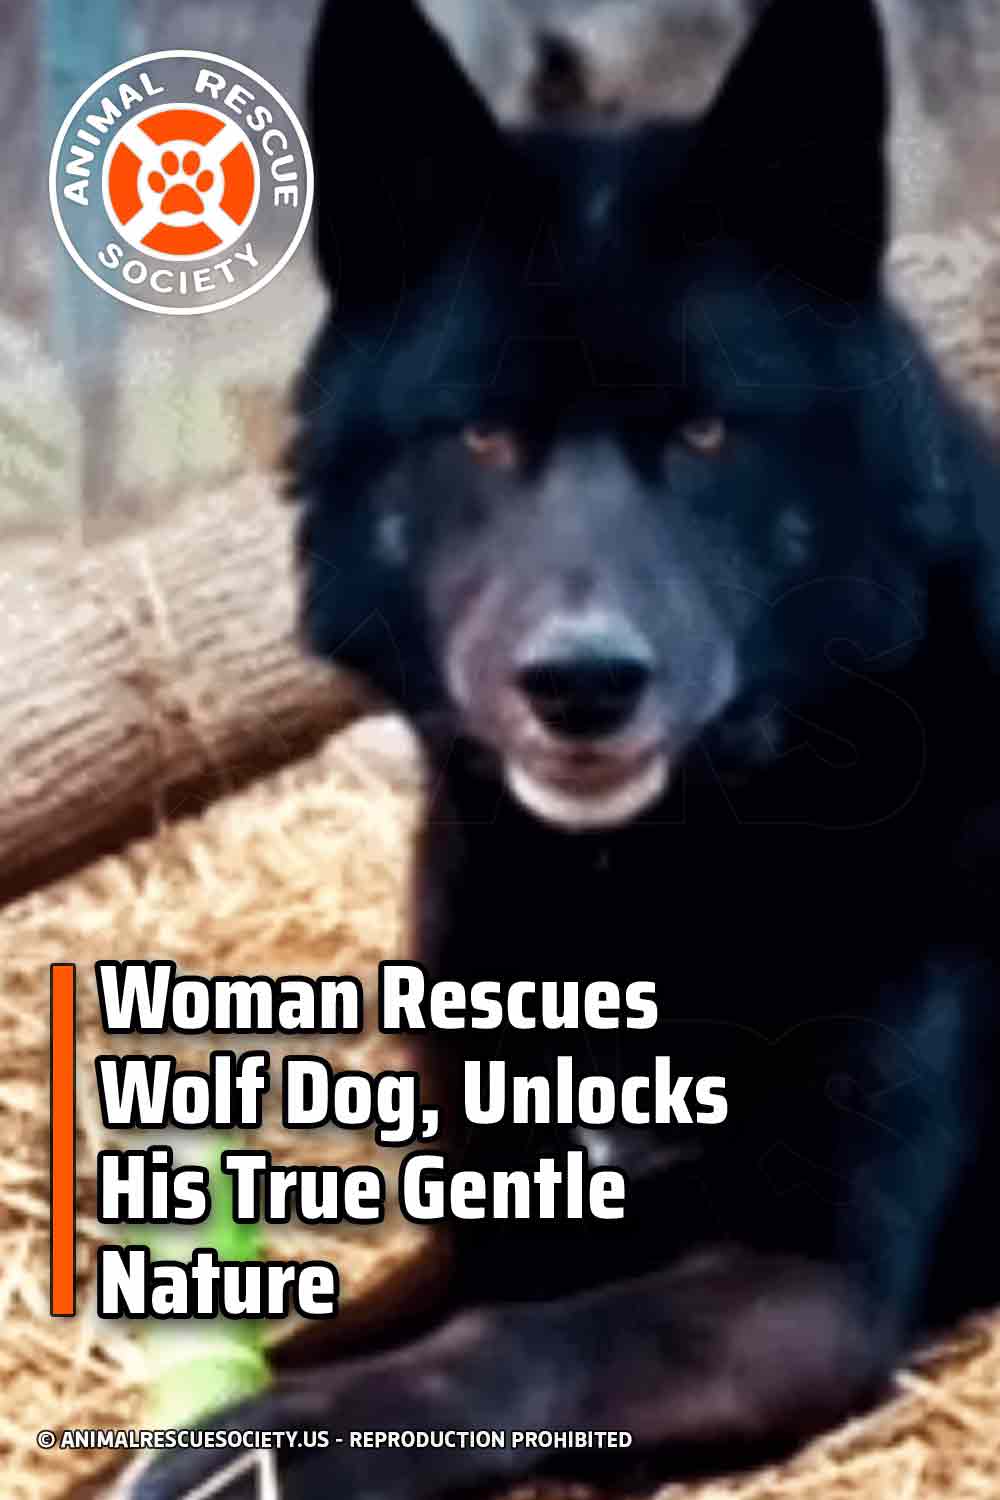 Woman Rescues Wolf Dog, Unlocks His True Gentle Nature